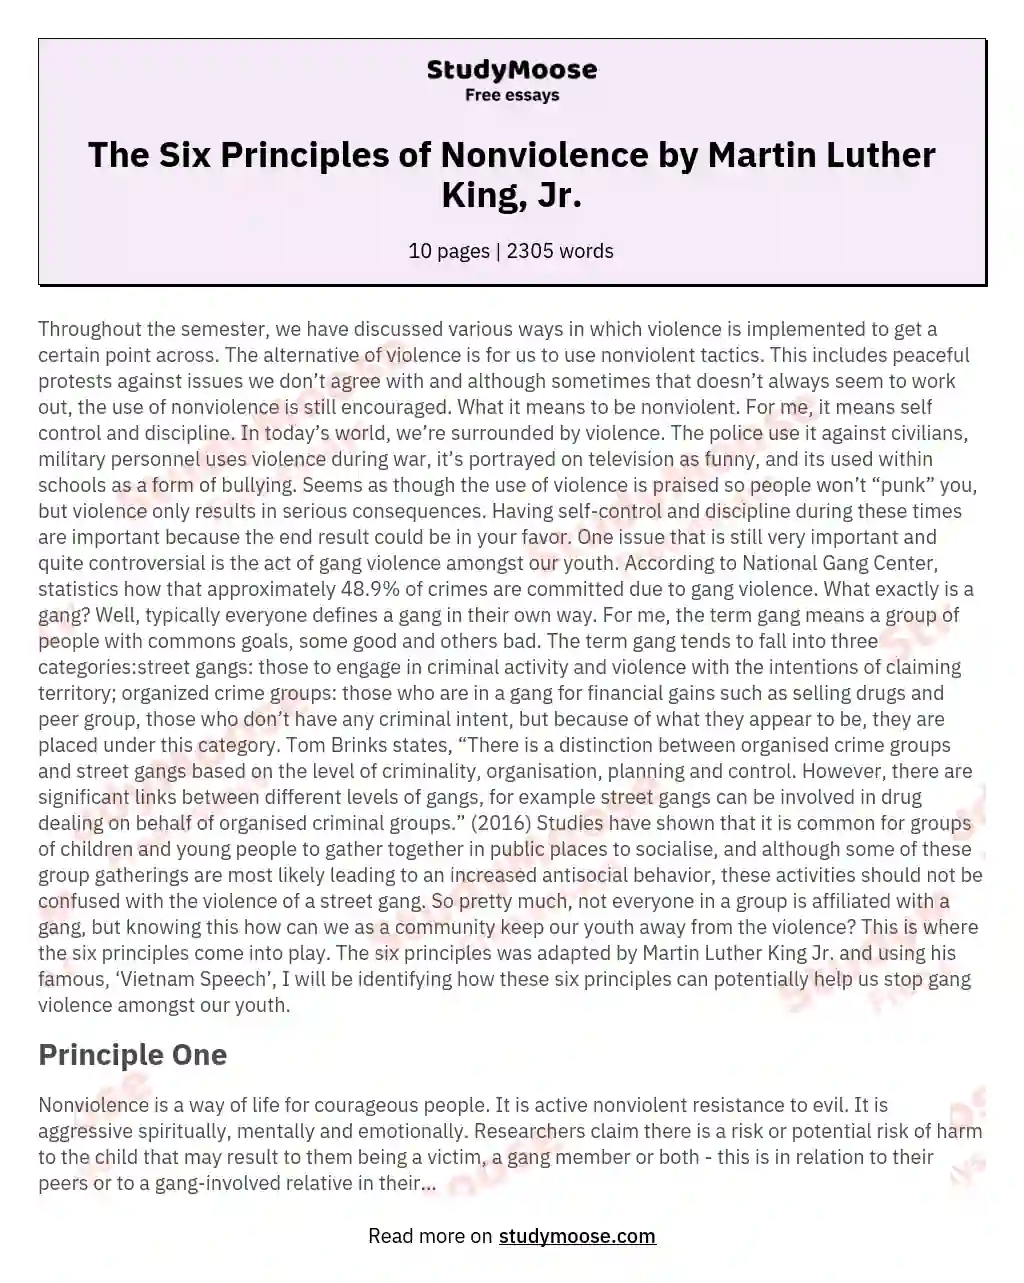 The Six Principles of Nonviolence by Martin Luther King, Jr.